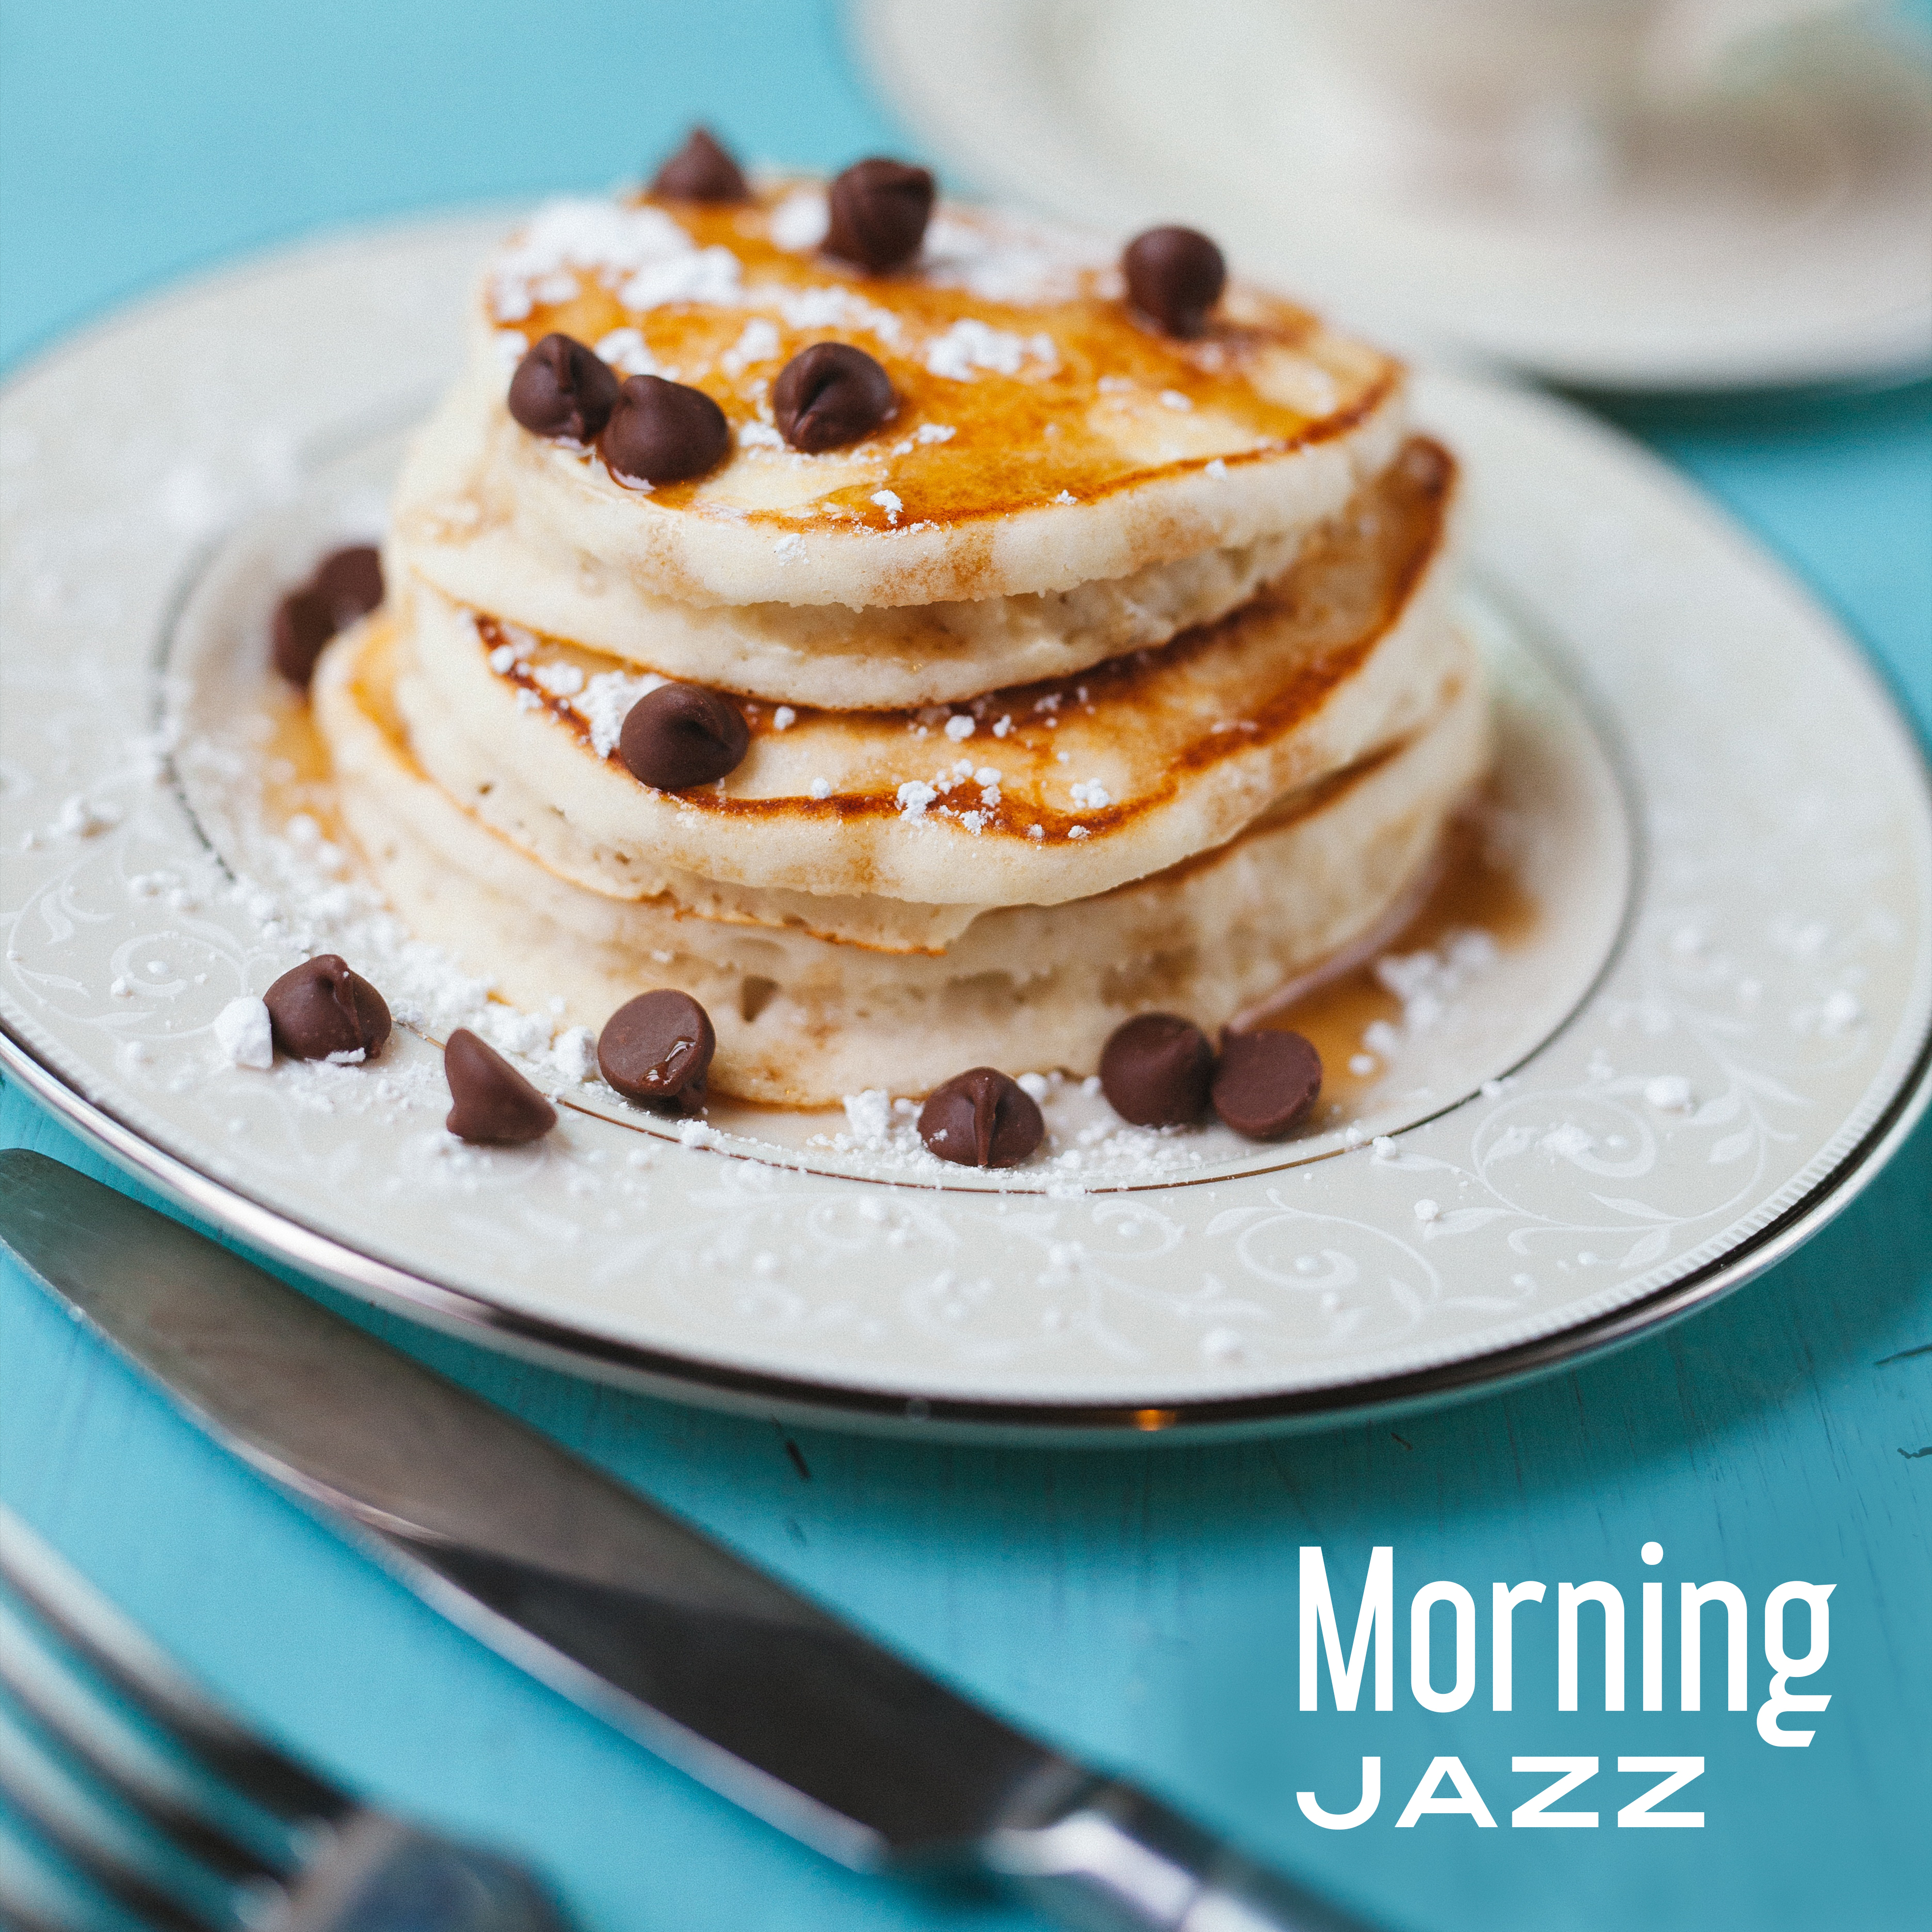 Morning Jazz – Cafe Music, Dinner Party, Meeting with Family, Piano Bar, Ambient Music, Restaurant Jazz, Romantic Time